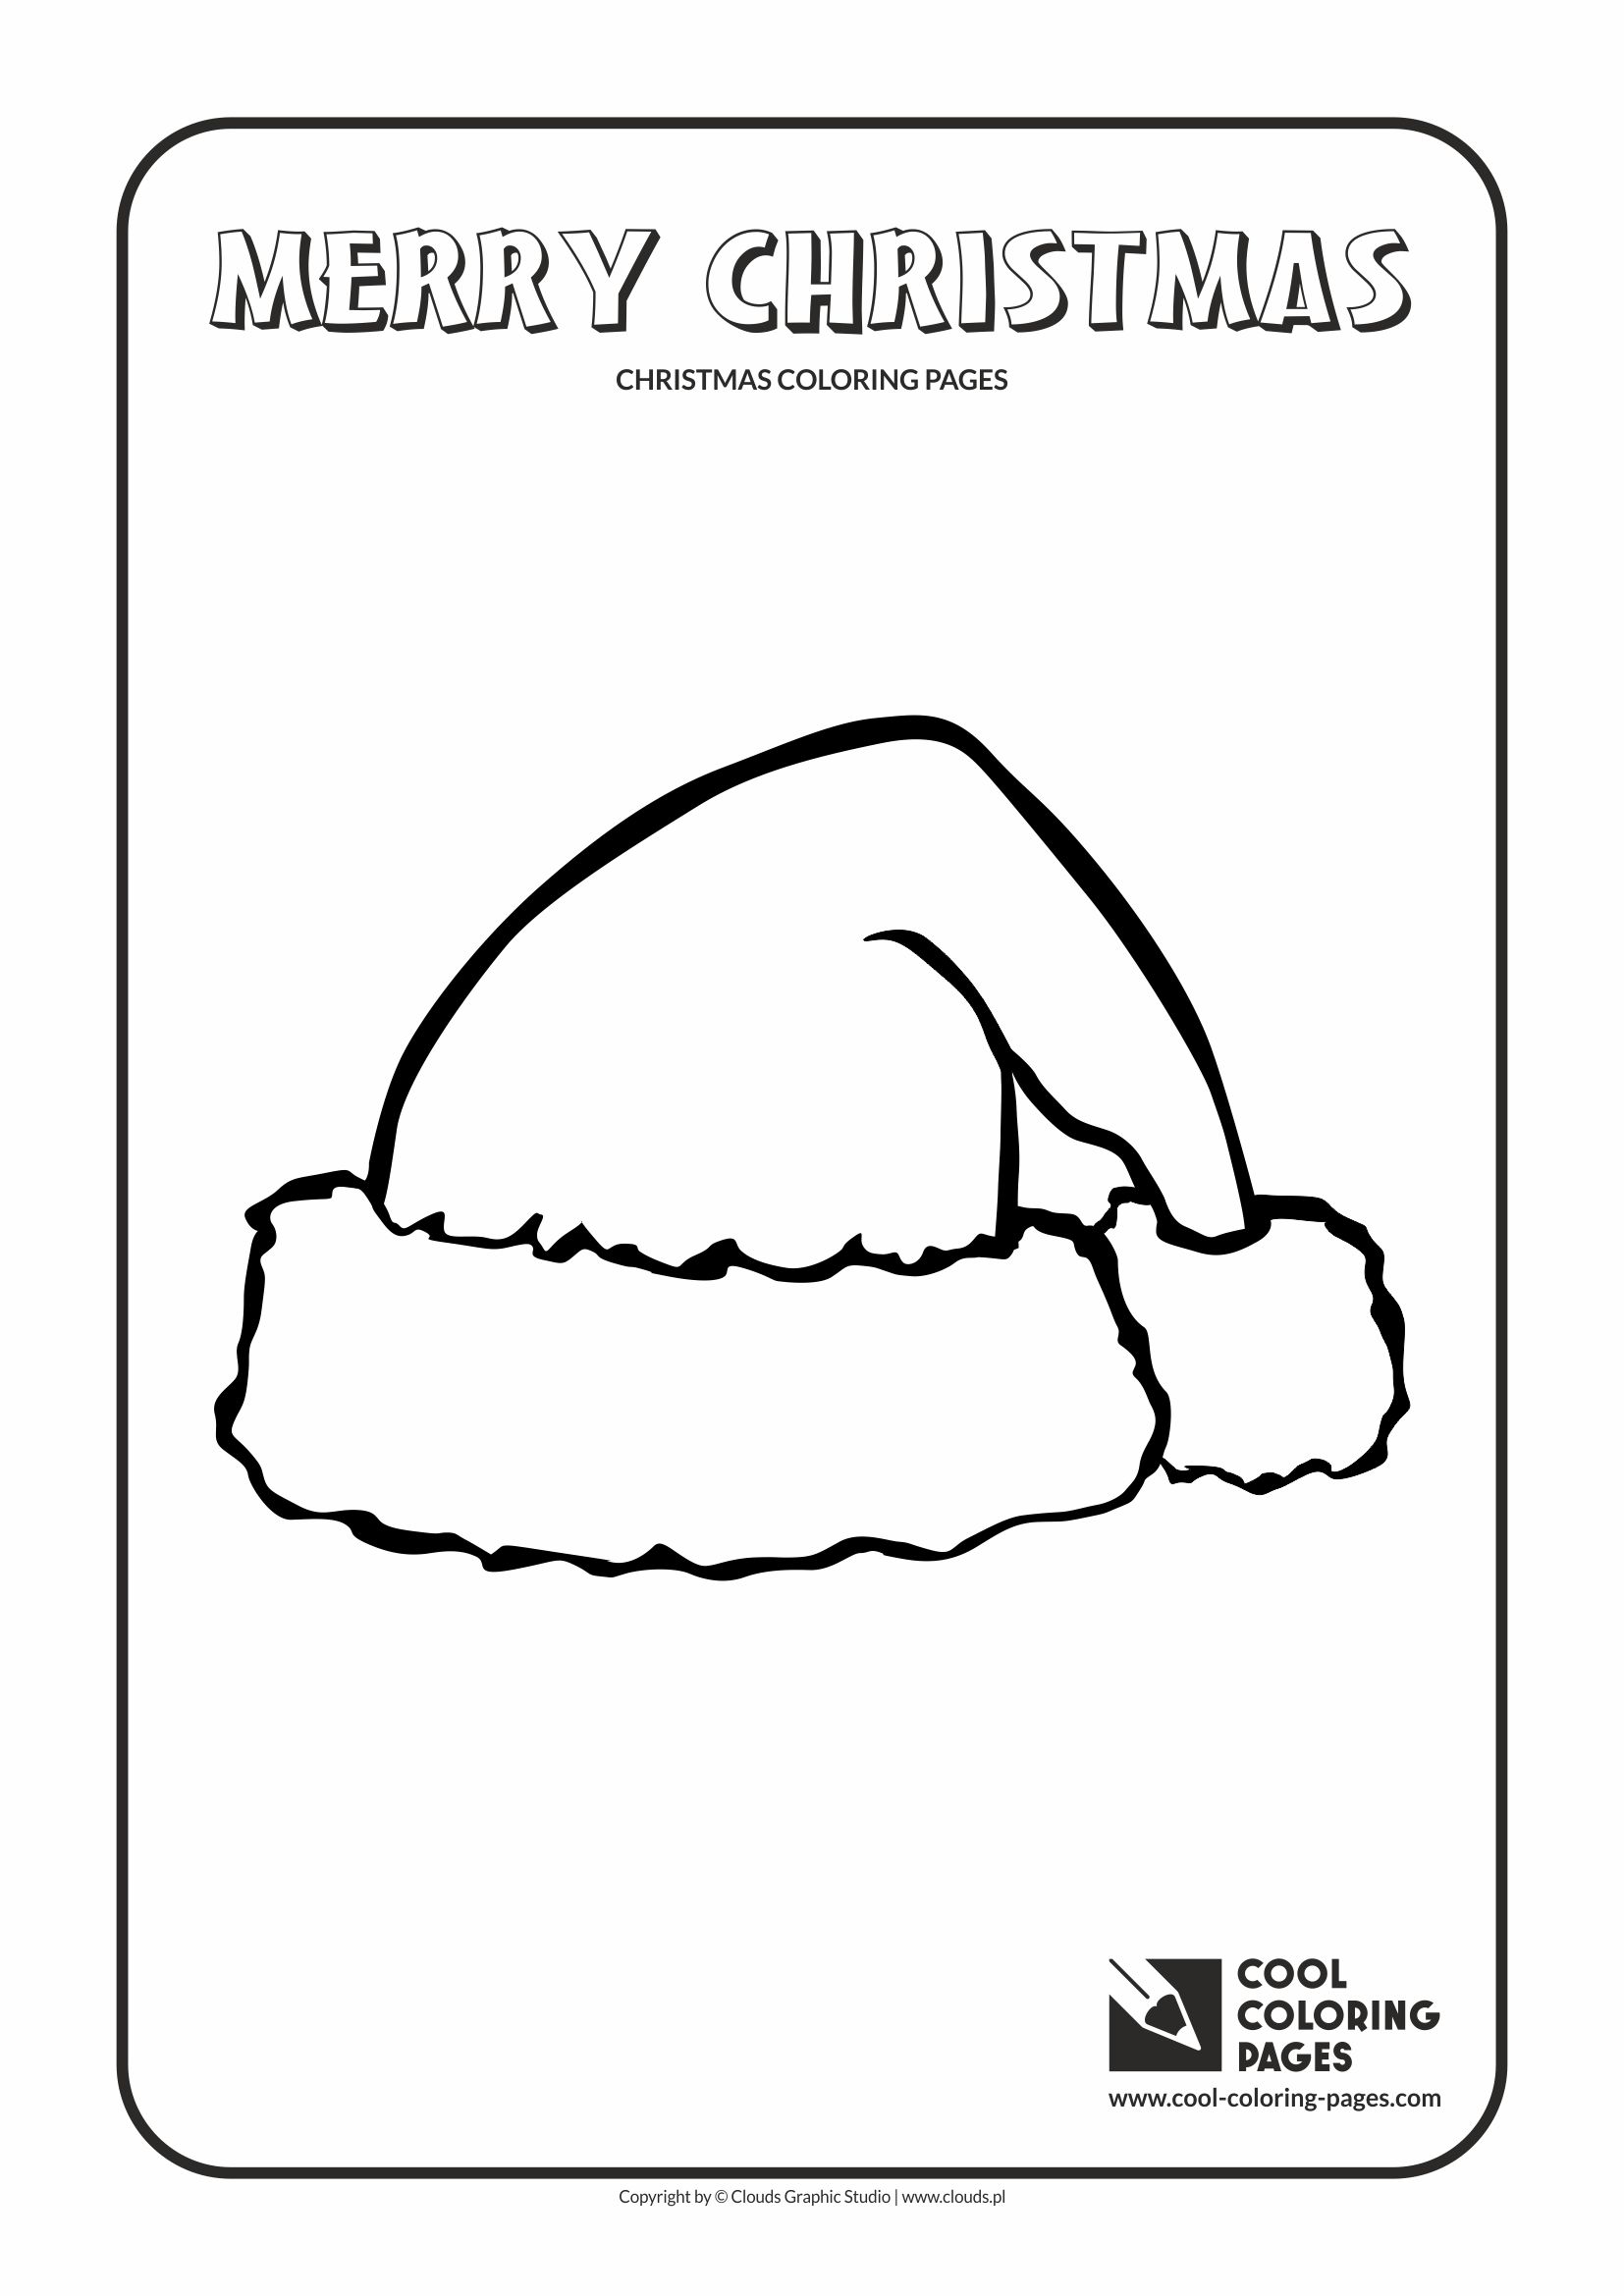 Cool Coloring Pages - Holidays / Santa Claus hat / Coloring page with Santa Claus hat